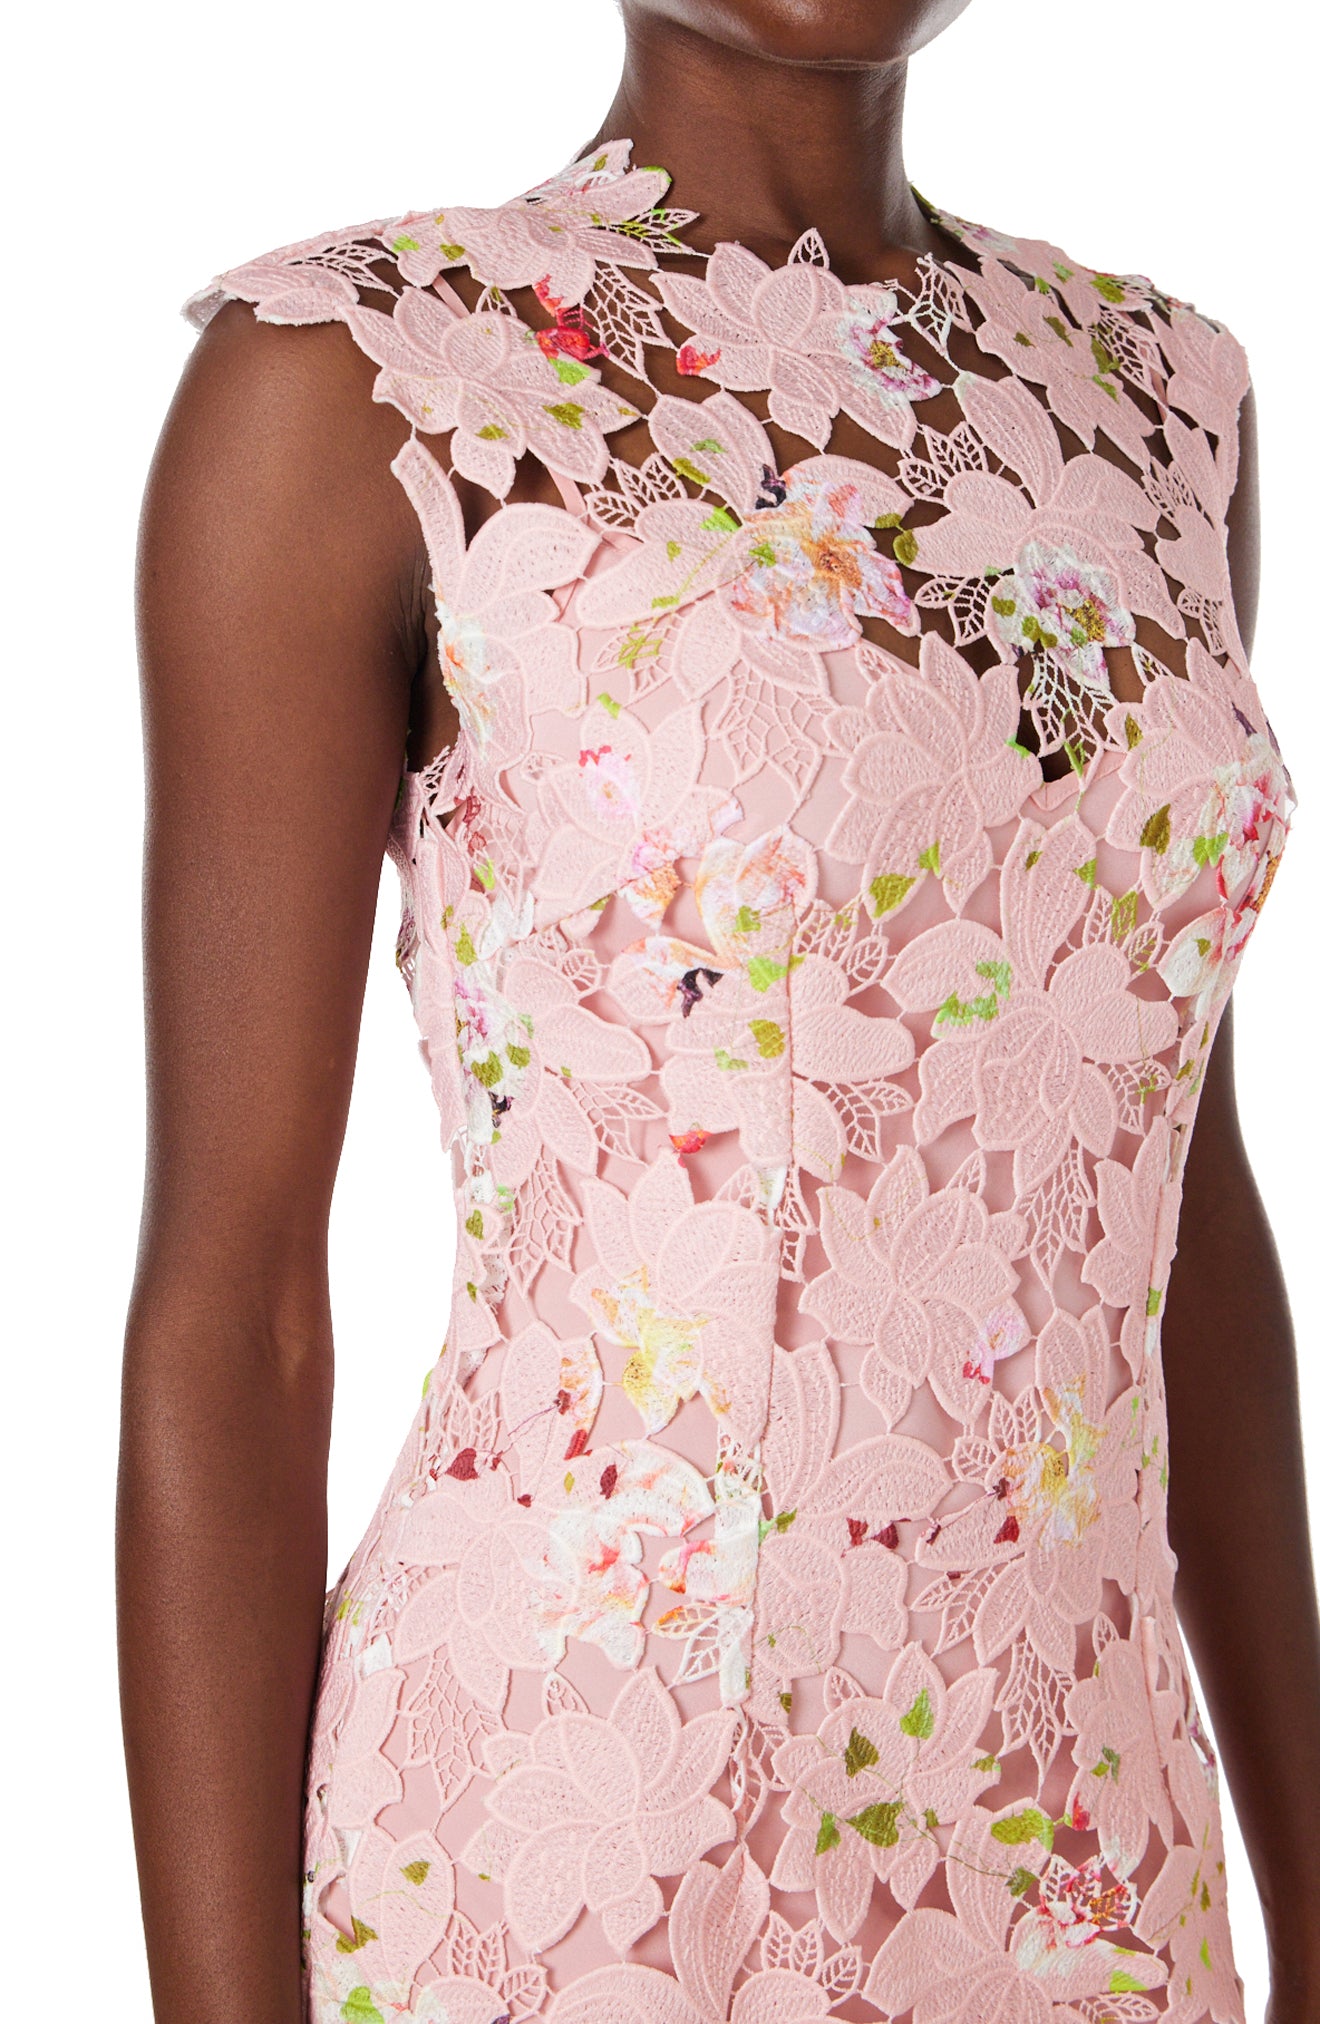 Monique Lhuillier sleeveless, midi length dress in peony pink floral printed lace.